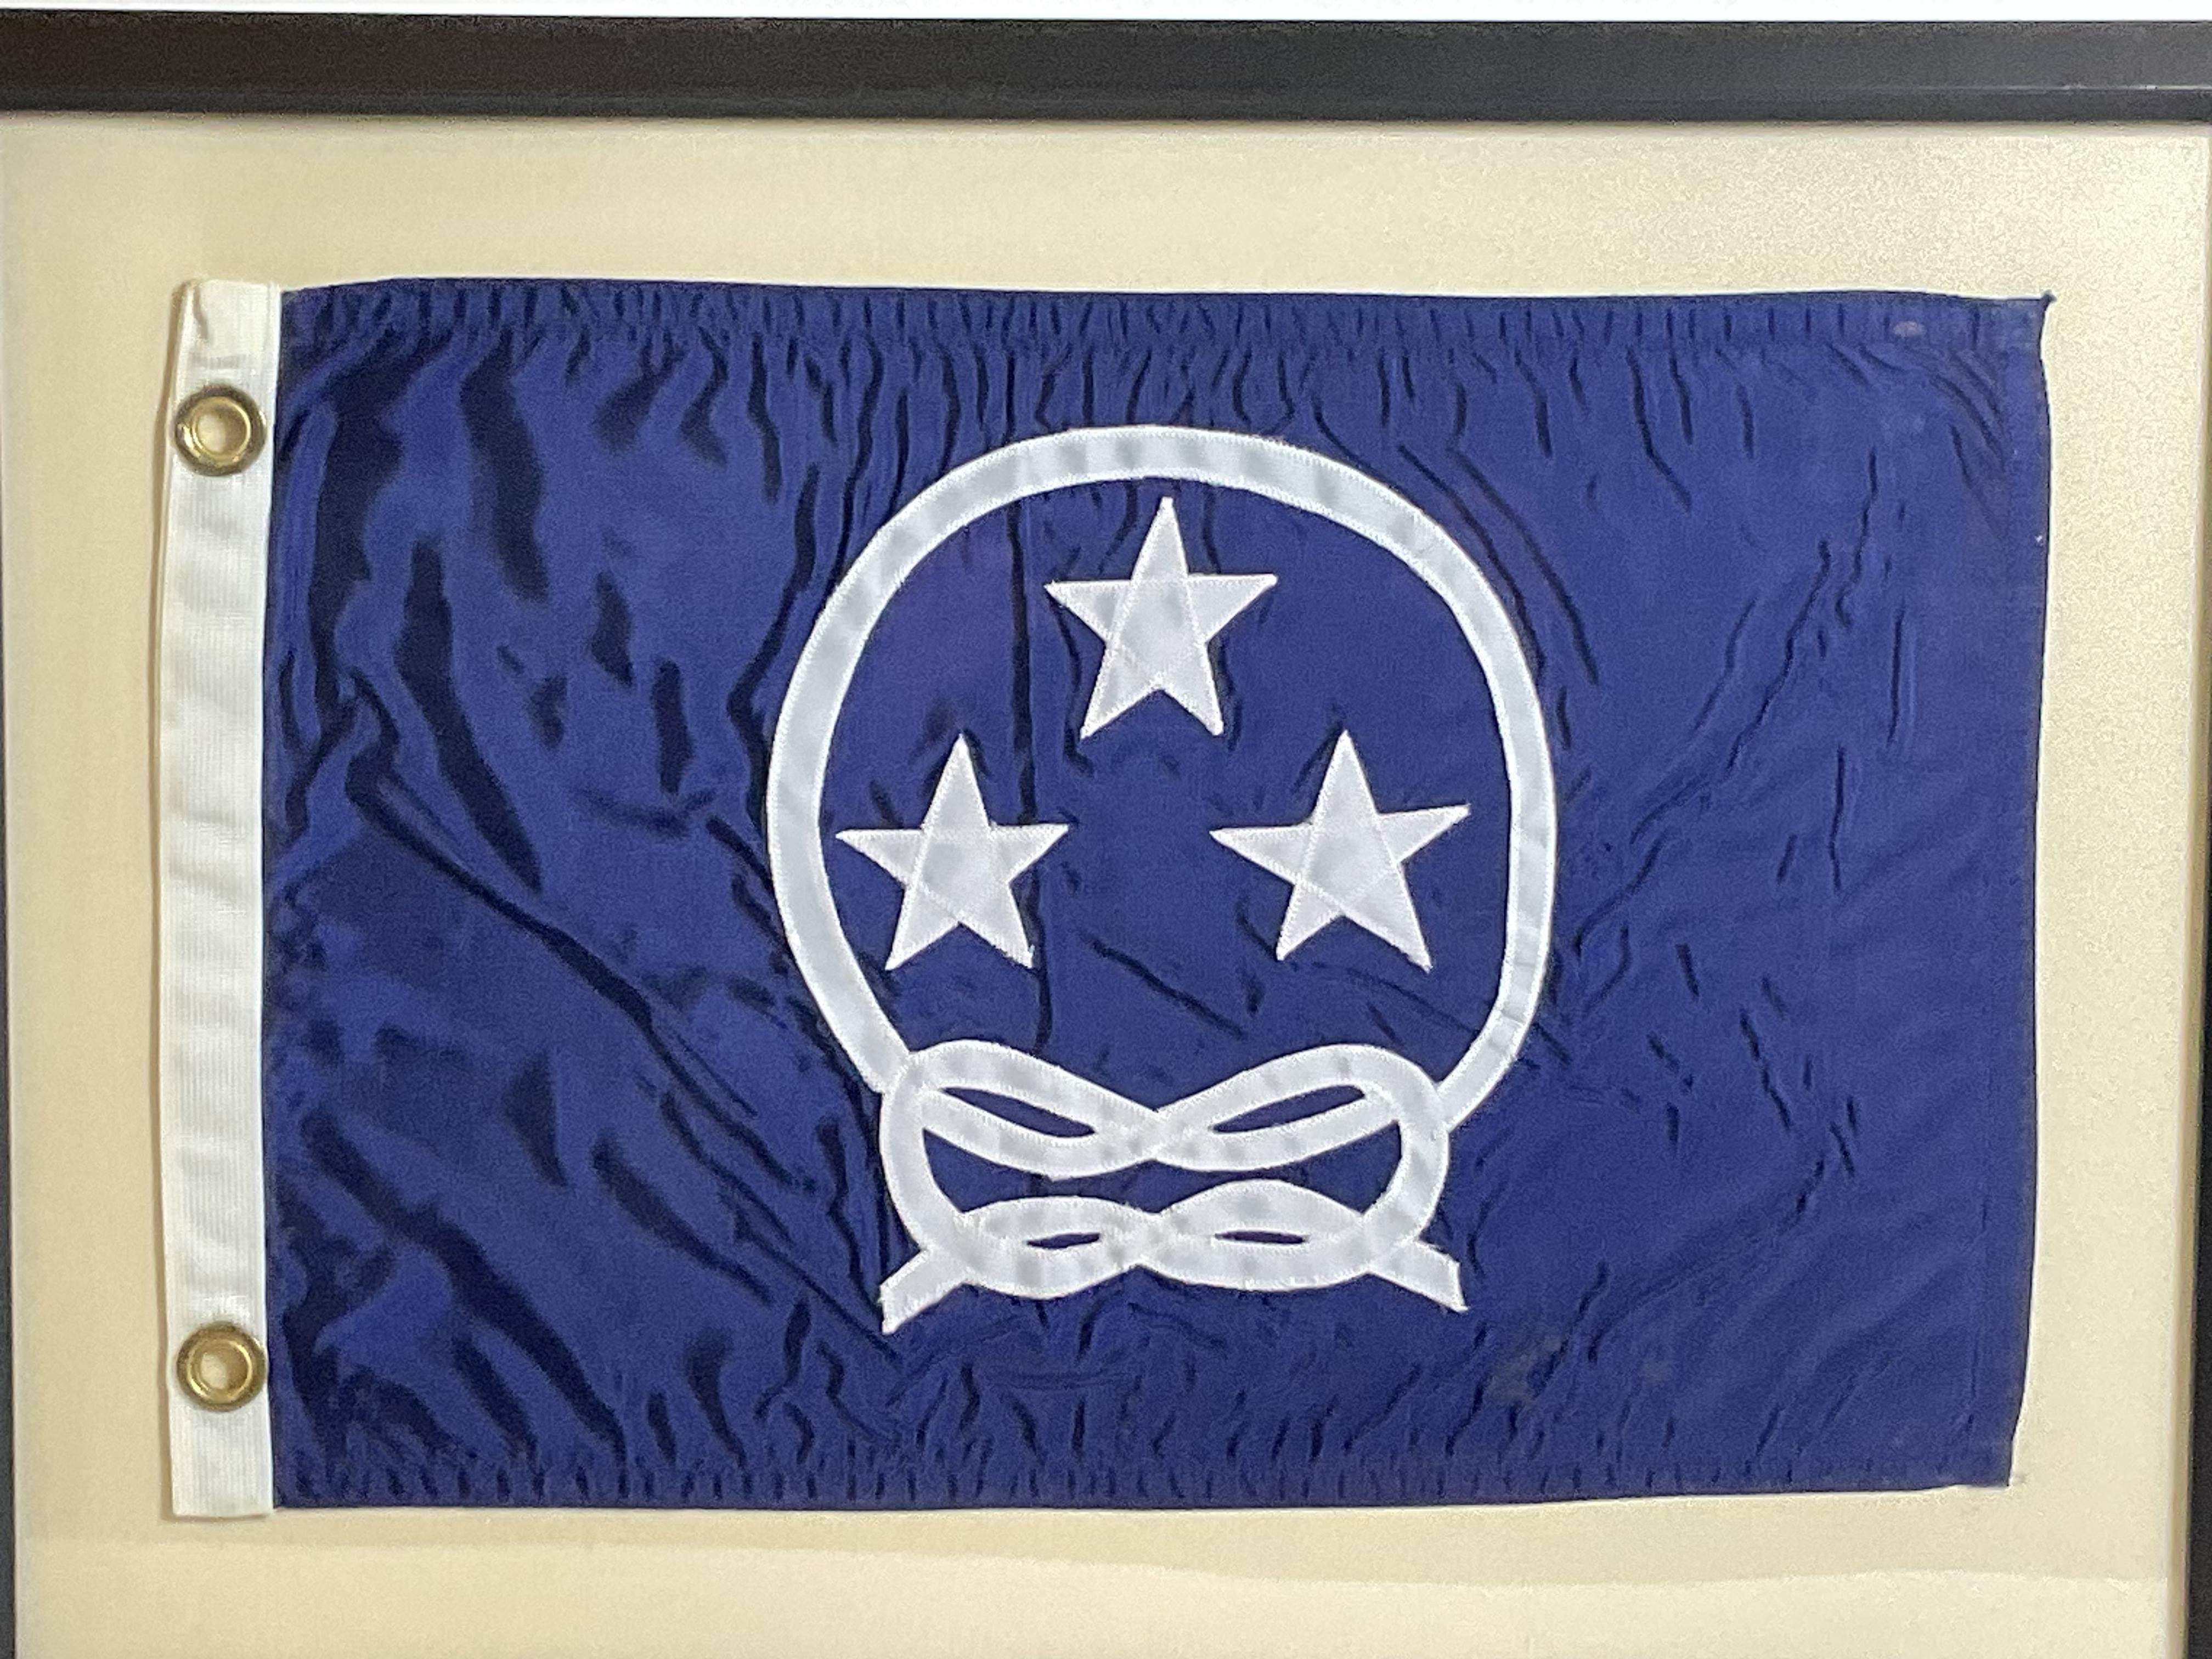 Yacht Club Commodores Flagge im Zustand „Gut“ im Angebot in Norwell, MA